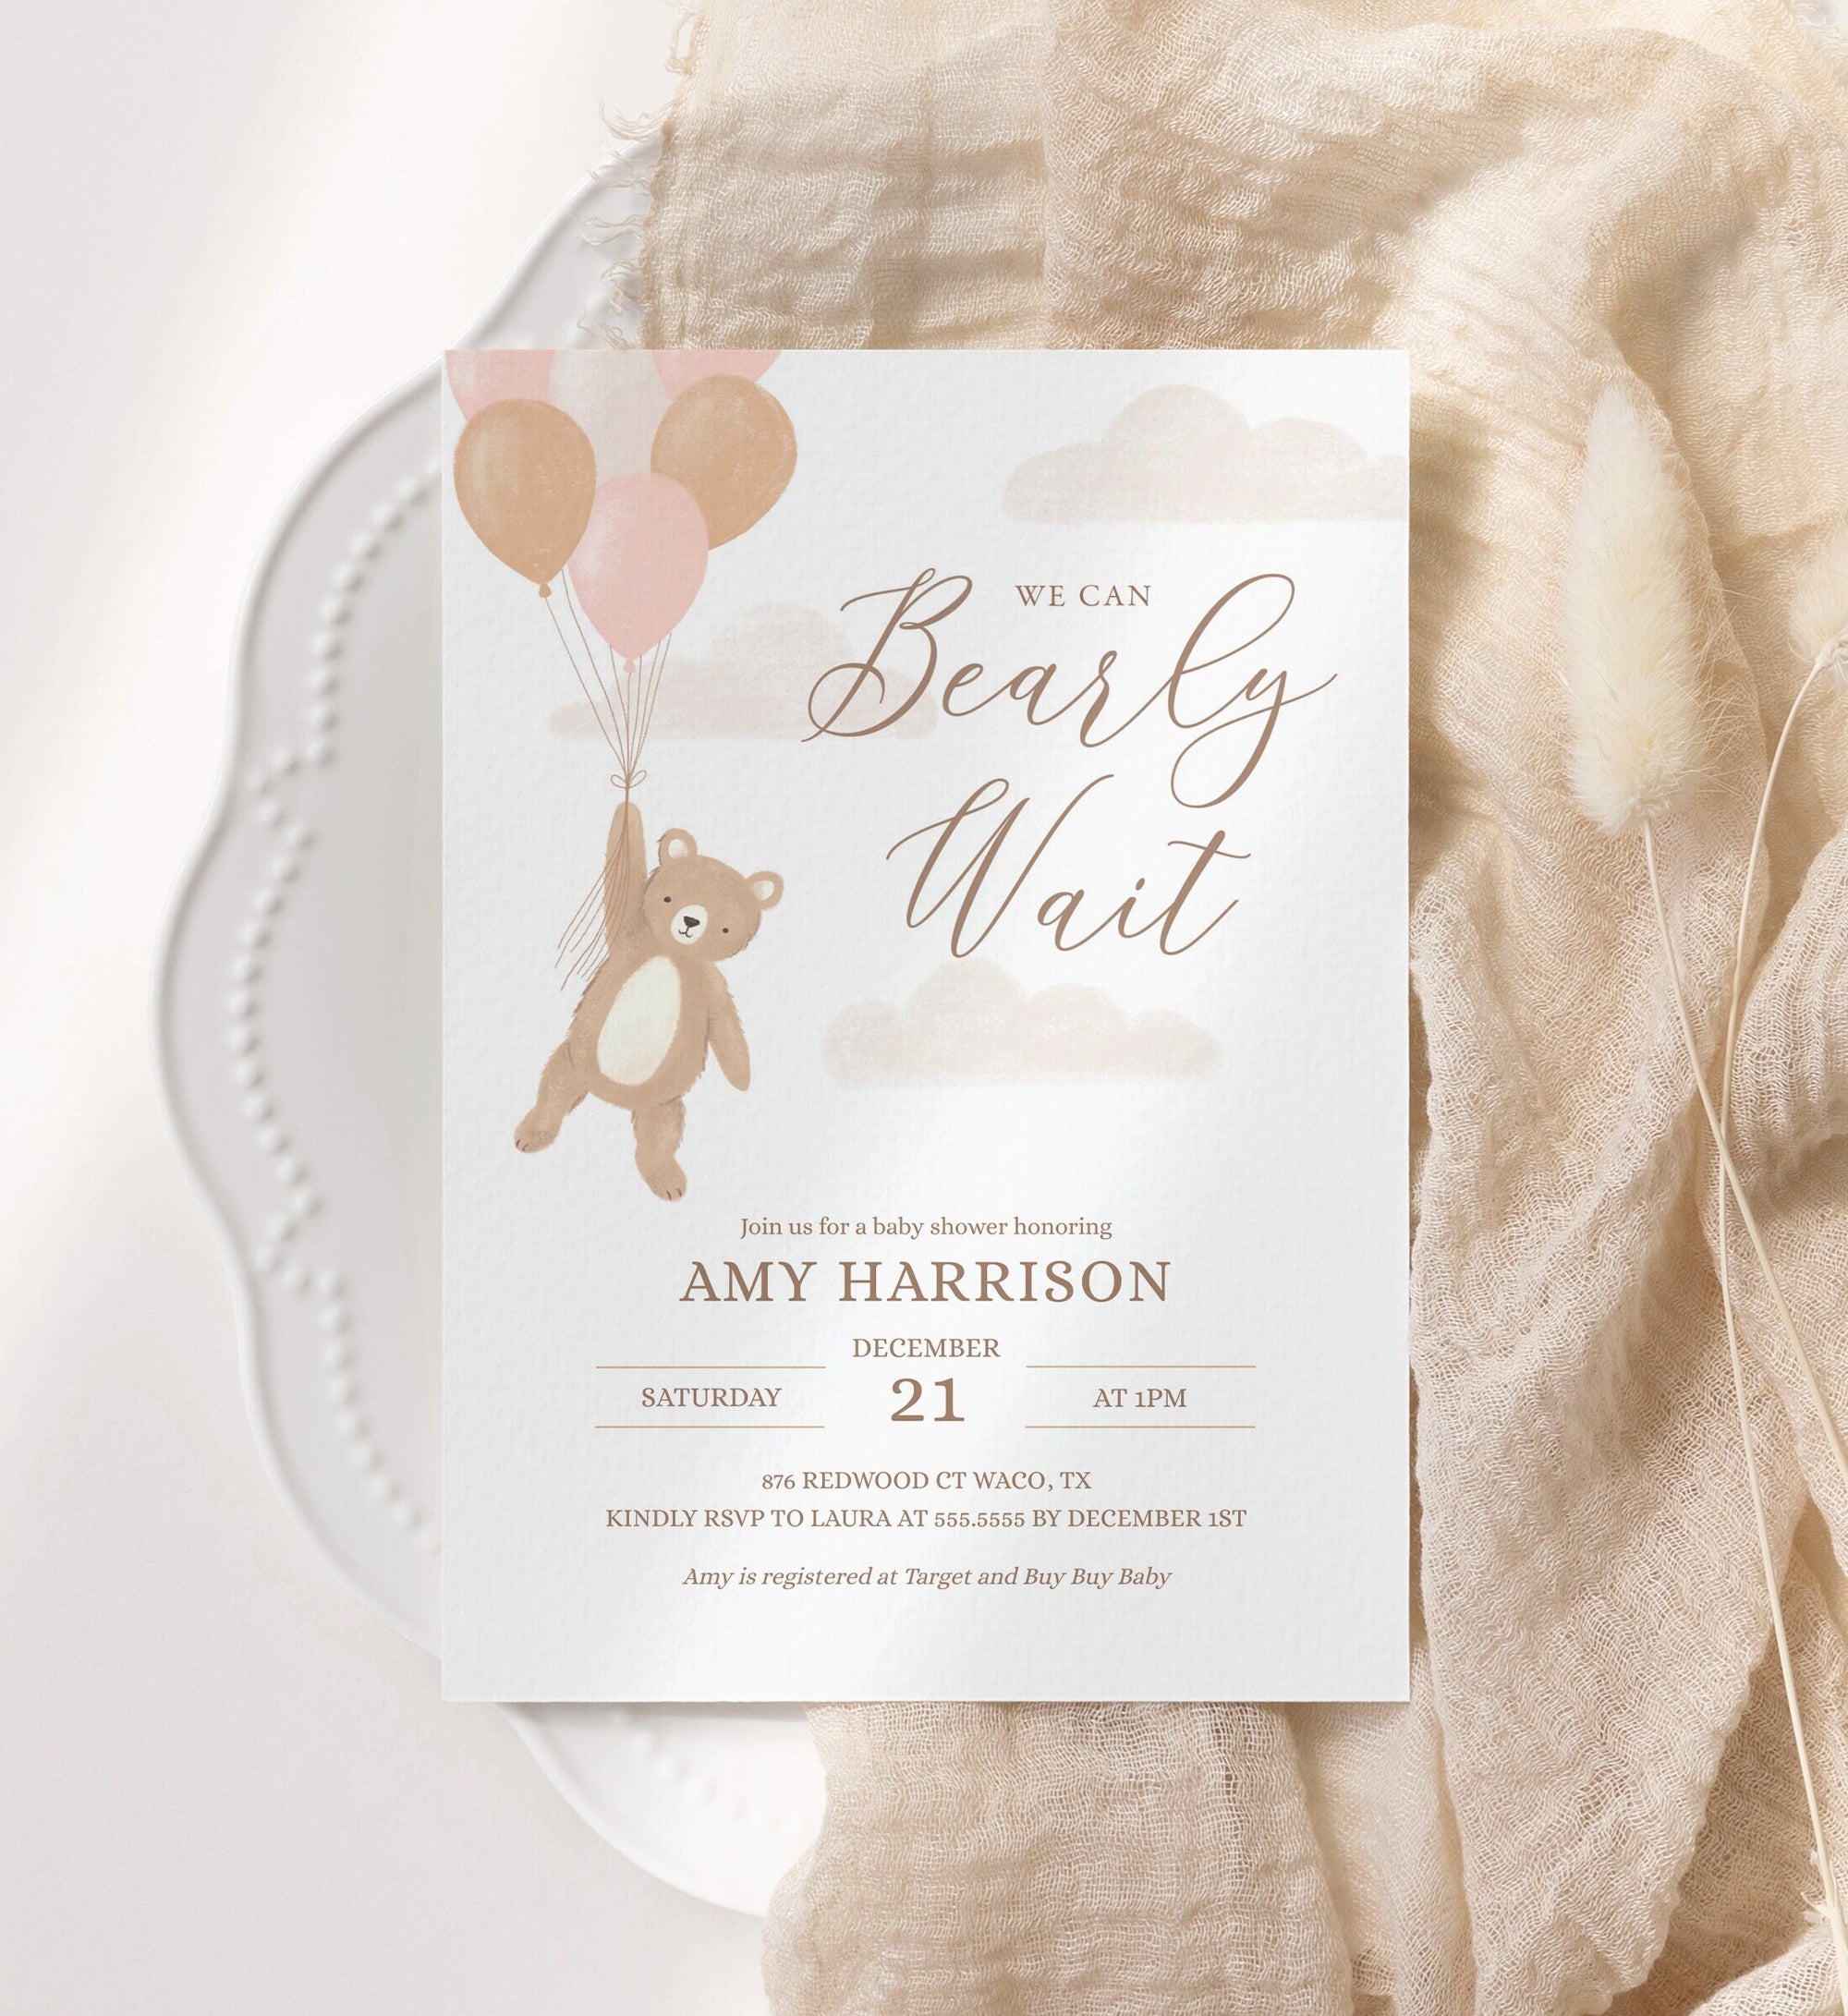 We Can Bearly Wait Baby Shower Invitation, Teddy Bear Balloon Girl Baby Shower Invite, Printable Invitation Template, DIGITAL DOWNLOAD